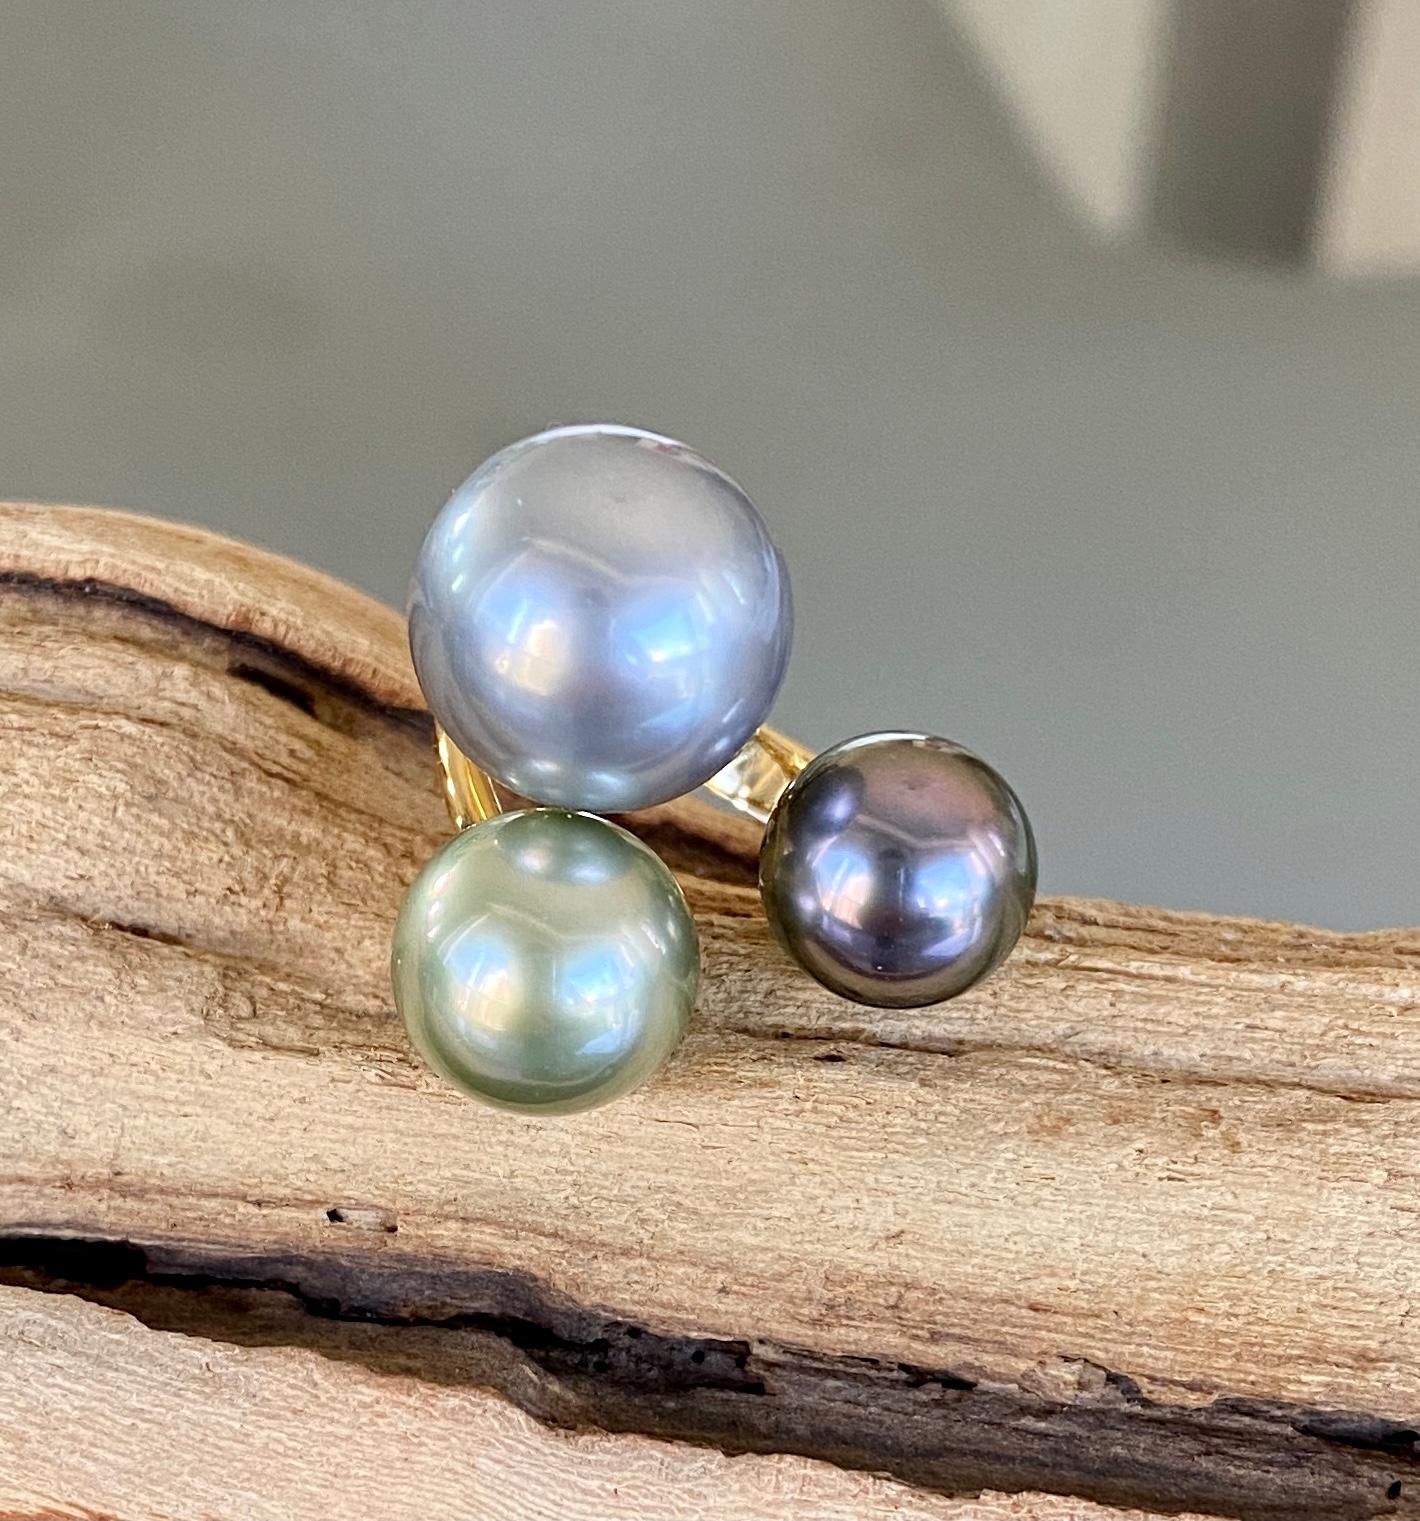 One-of-a-kind South Sea Tahitian cluster pearl ring with three different sizes (13, 10, 9 mm) of pearls in gorgeous hues of grey and rare fancy green and purple, handcrafted in 18 karat yellow gold. US size 6.

This amazing cocktail ring looks like